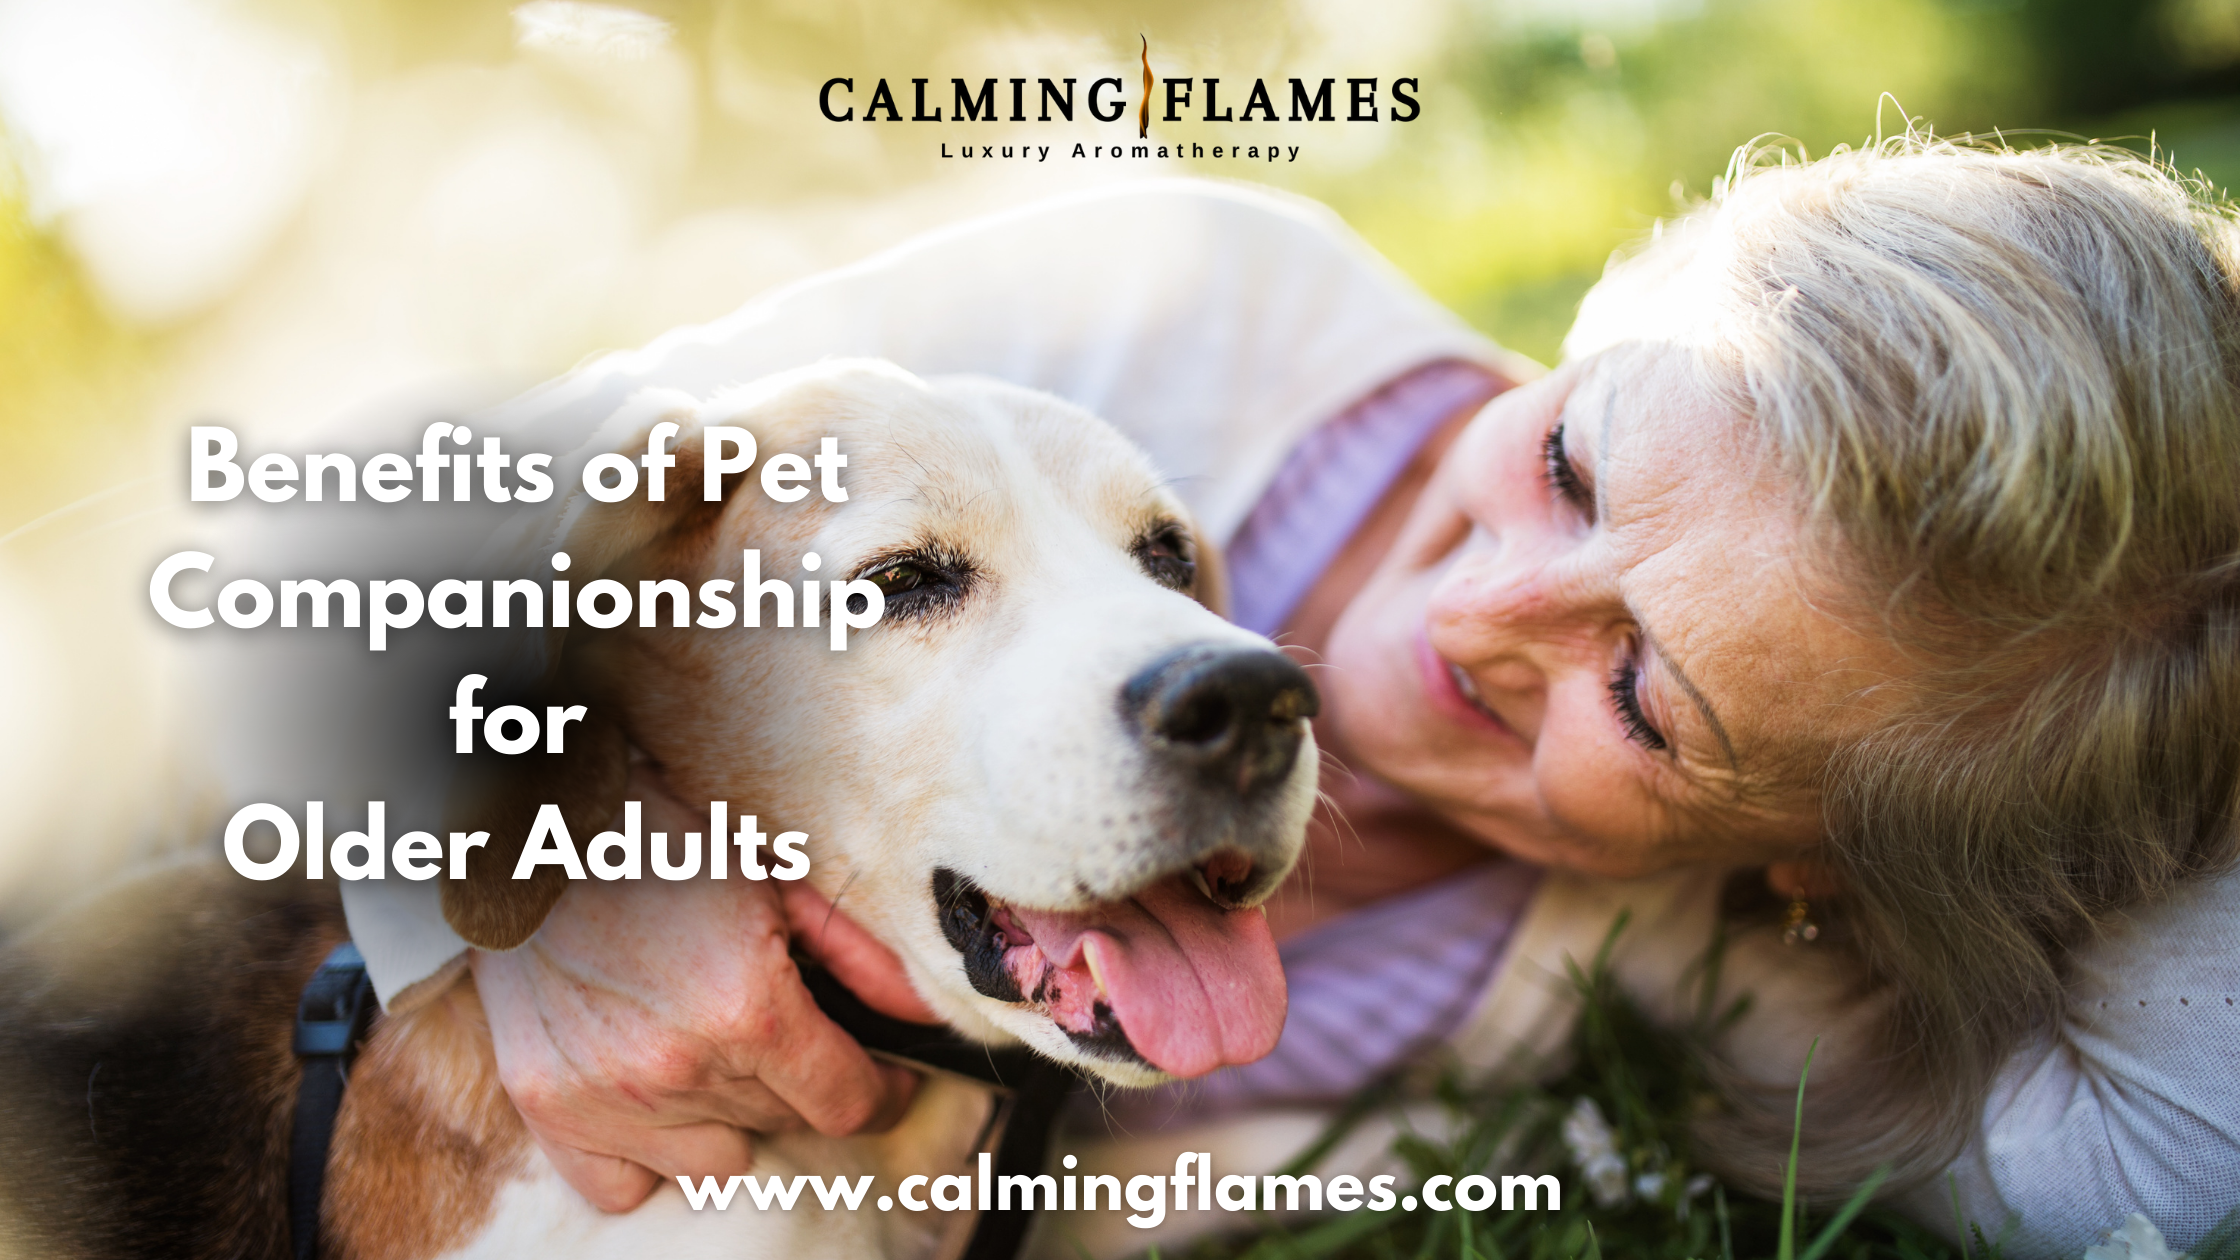 Maintaining Cognitive Skills in Older Adults: The Impact of Living with Pets